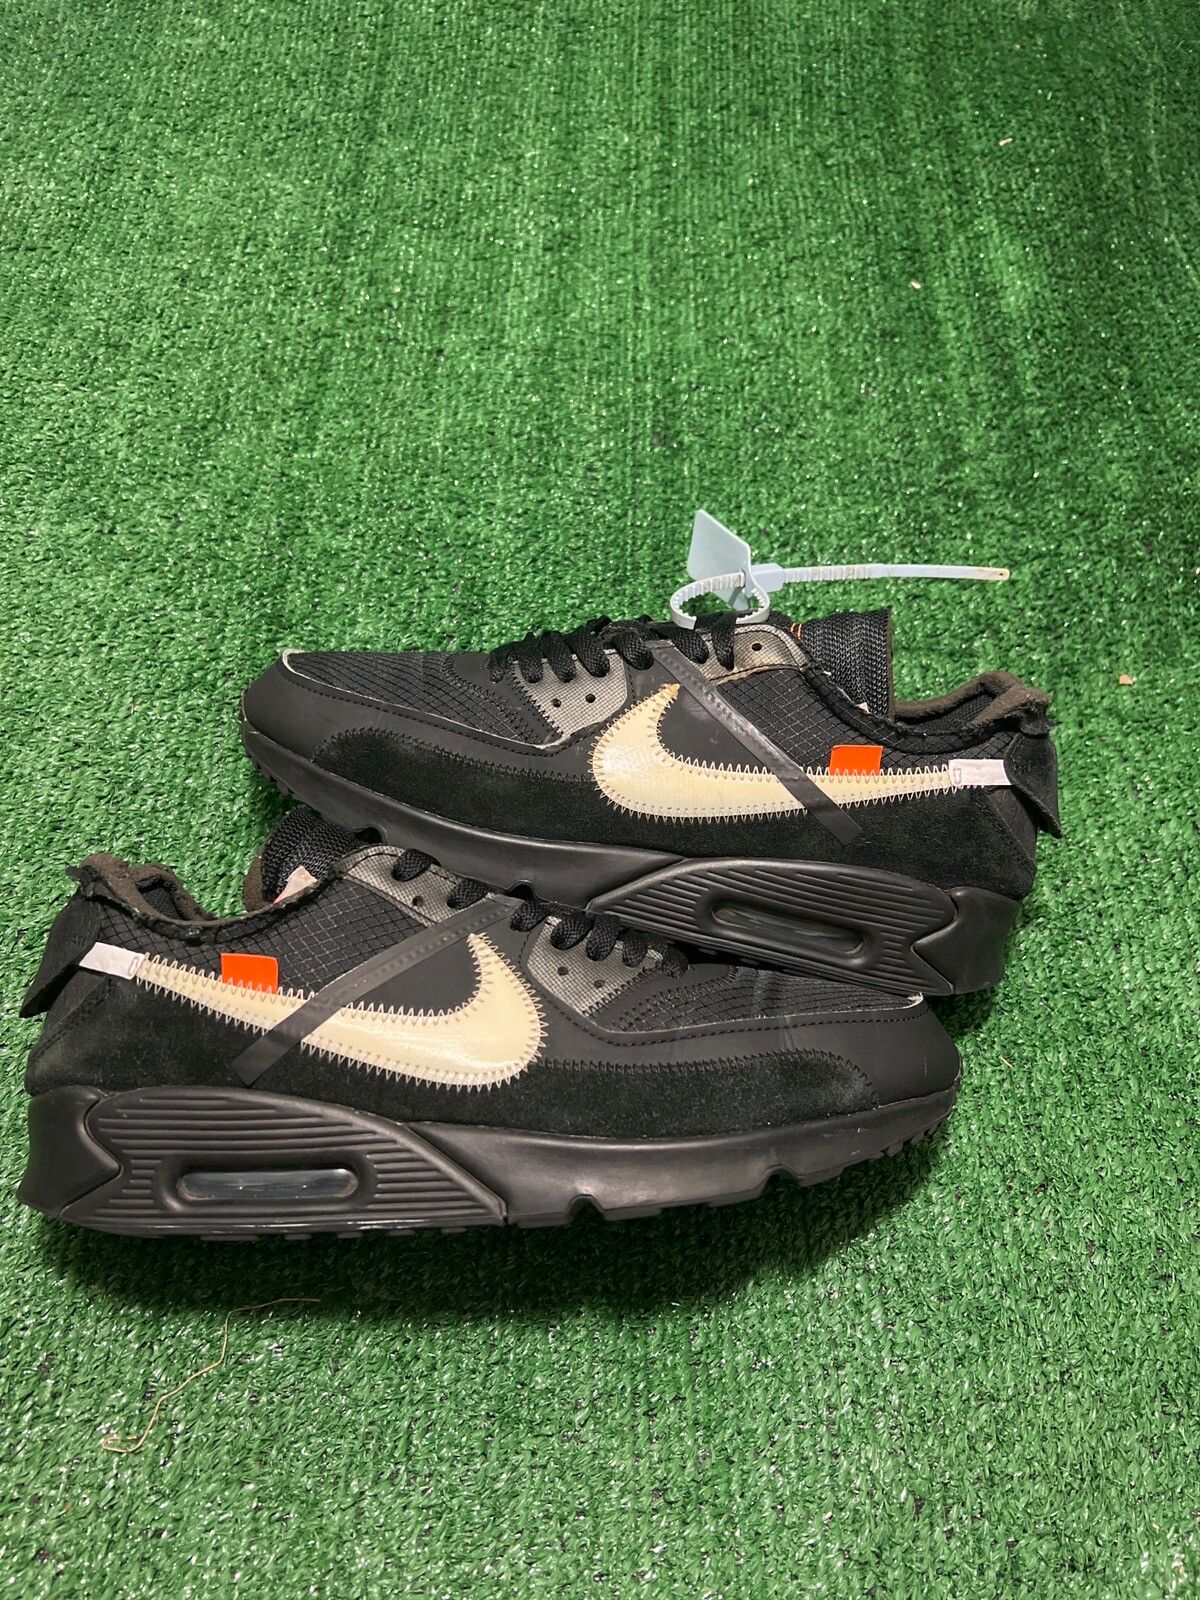 Pre-owned Nike X Off White Nike Air Max 90 Off White Black Size 10.5 Shoes